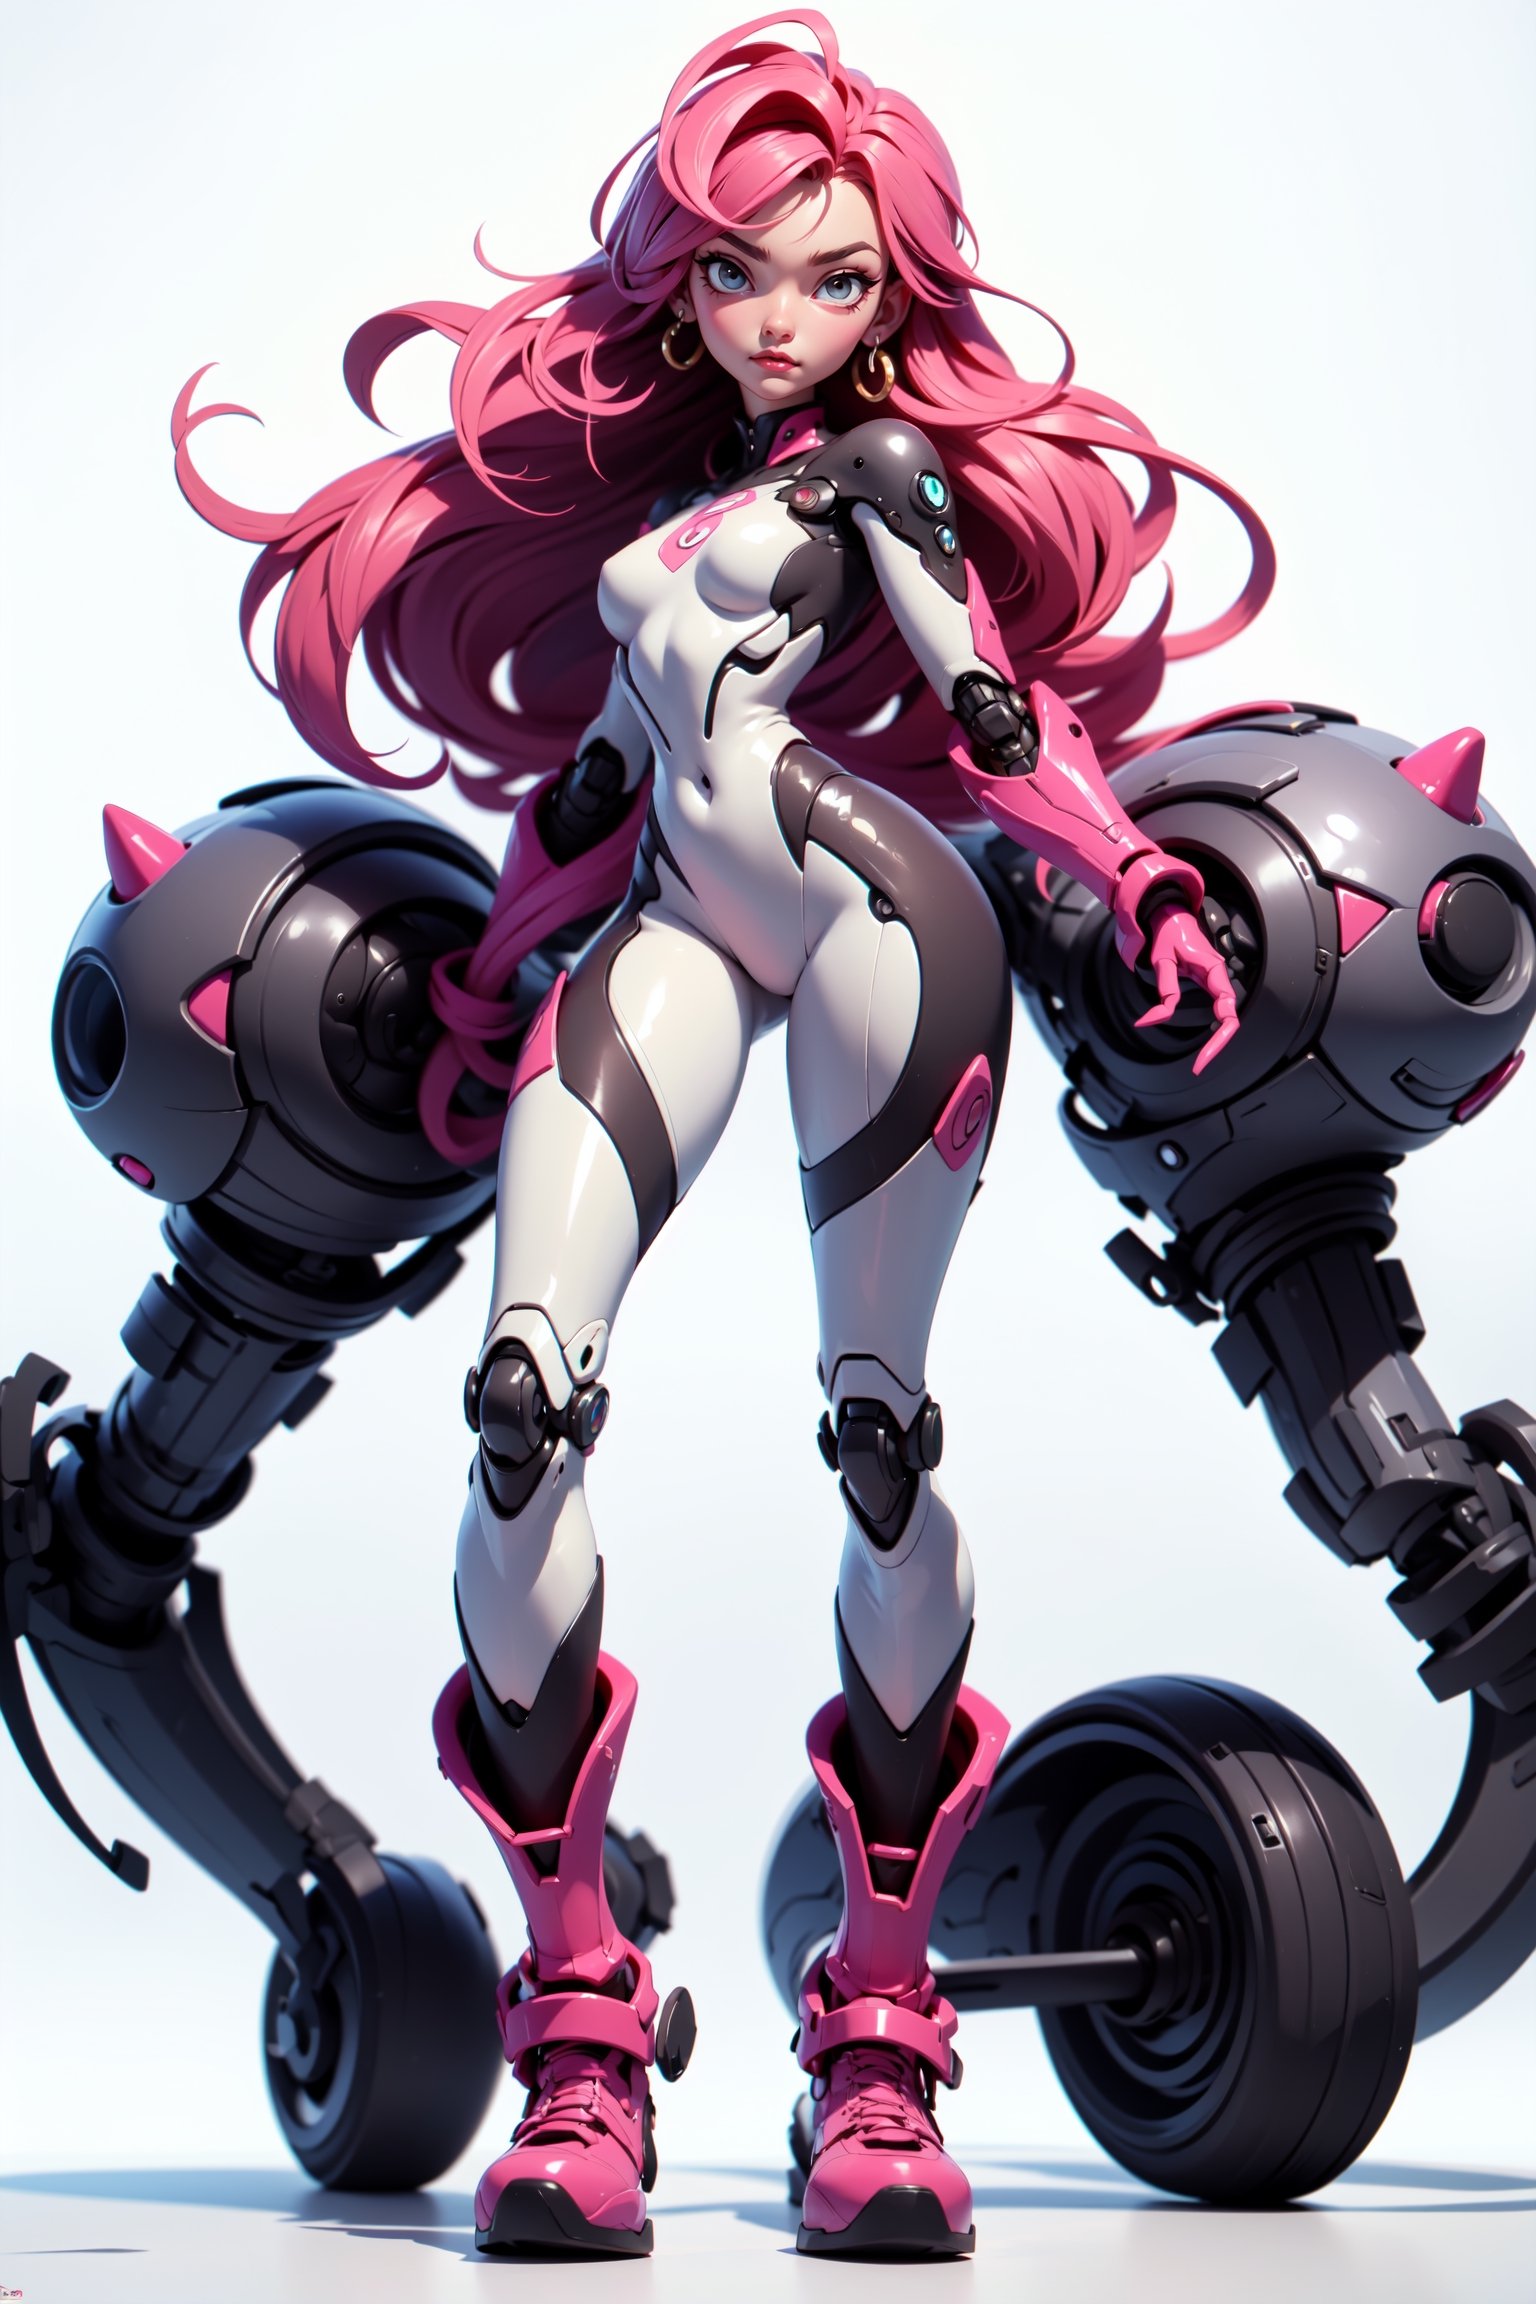 masterpiece, best quality, {{clean white background}}, (beautiful detailed face, beautiful detailed eyes), highres, ultra detailed, masterpiece, best quality, detailed eyes, full body, 1_girl, standing dynamic pose, long pink hair, slender figure, slender legs, slender hips. cybertronic metal arm, tight space suit showing off her slim figure, small breasts, large oversized moon boots, cute robotic companion with large wheels,Futa